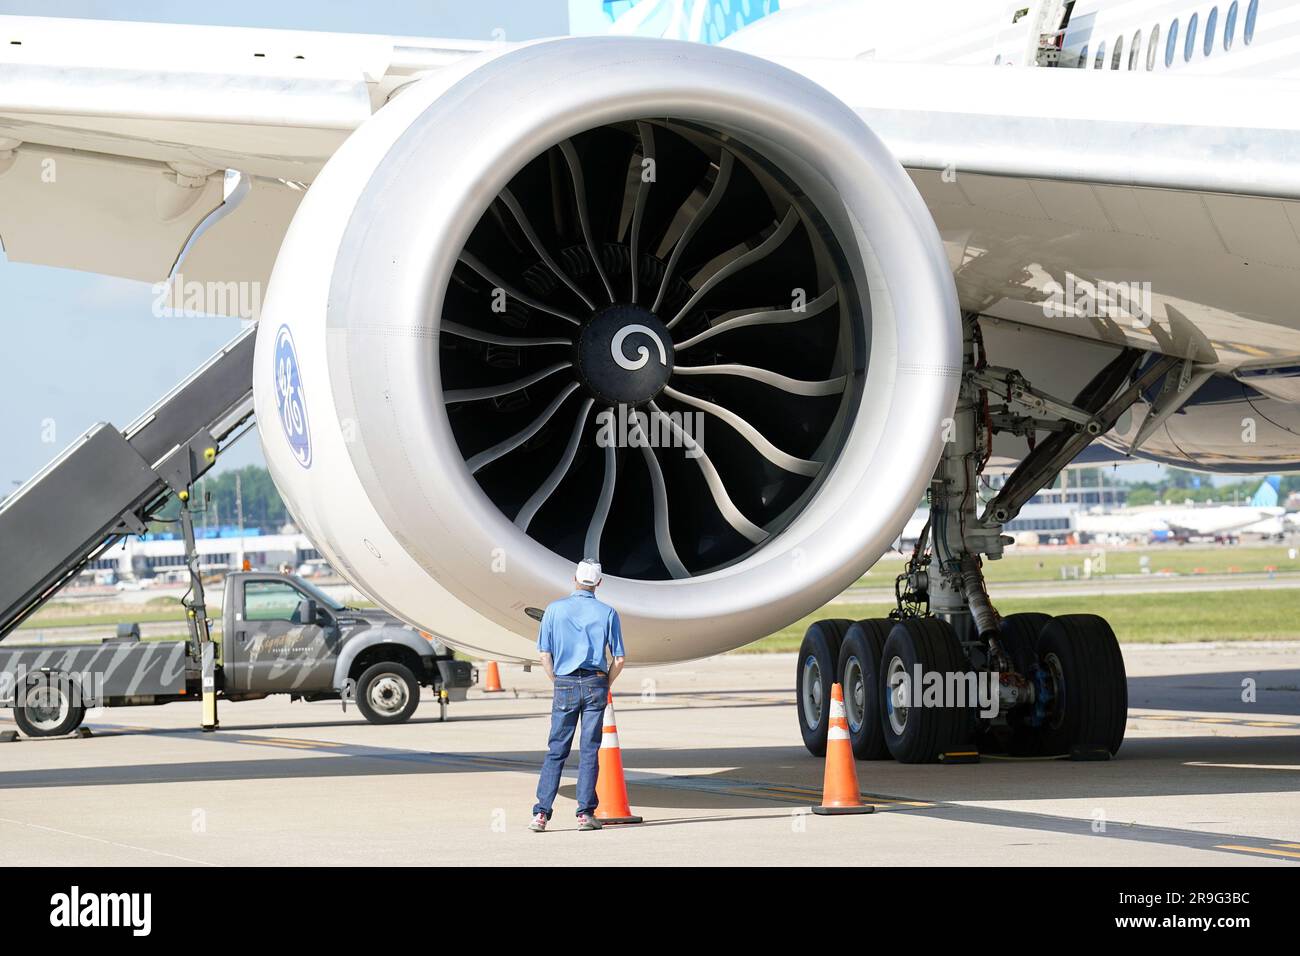 A Boeing employee gets a closer look at the engine on a Boeing 777-9, commercial jet that is in St. Louis for a layover at St. Louis-Lambert International Airport in St. Louis on Monday, June 26, 2023. The 777-9 is the only Boeing commercial airplane with St. Louis- made parts on the aircraft. Boeing employees will spend the day touring the aircraft, seeing it for the first time since production began. Boeing employees in St. Louis produce the 777-9's folding wing tip, moveable trailing edge and fixed leading edge on the wings, as well as the rudder and elevator on the empennage. Photo by Bill Stock Photo